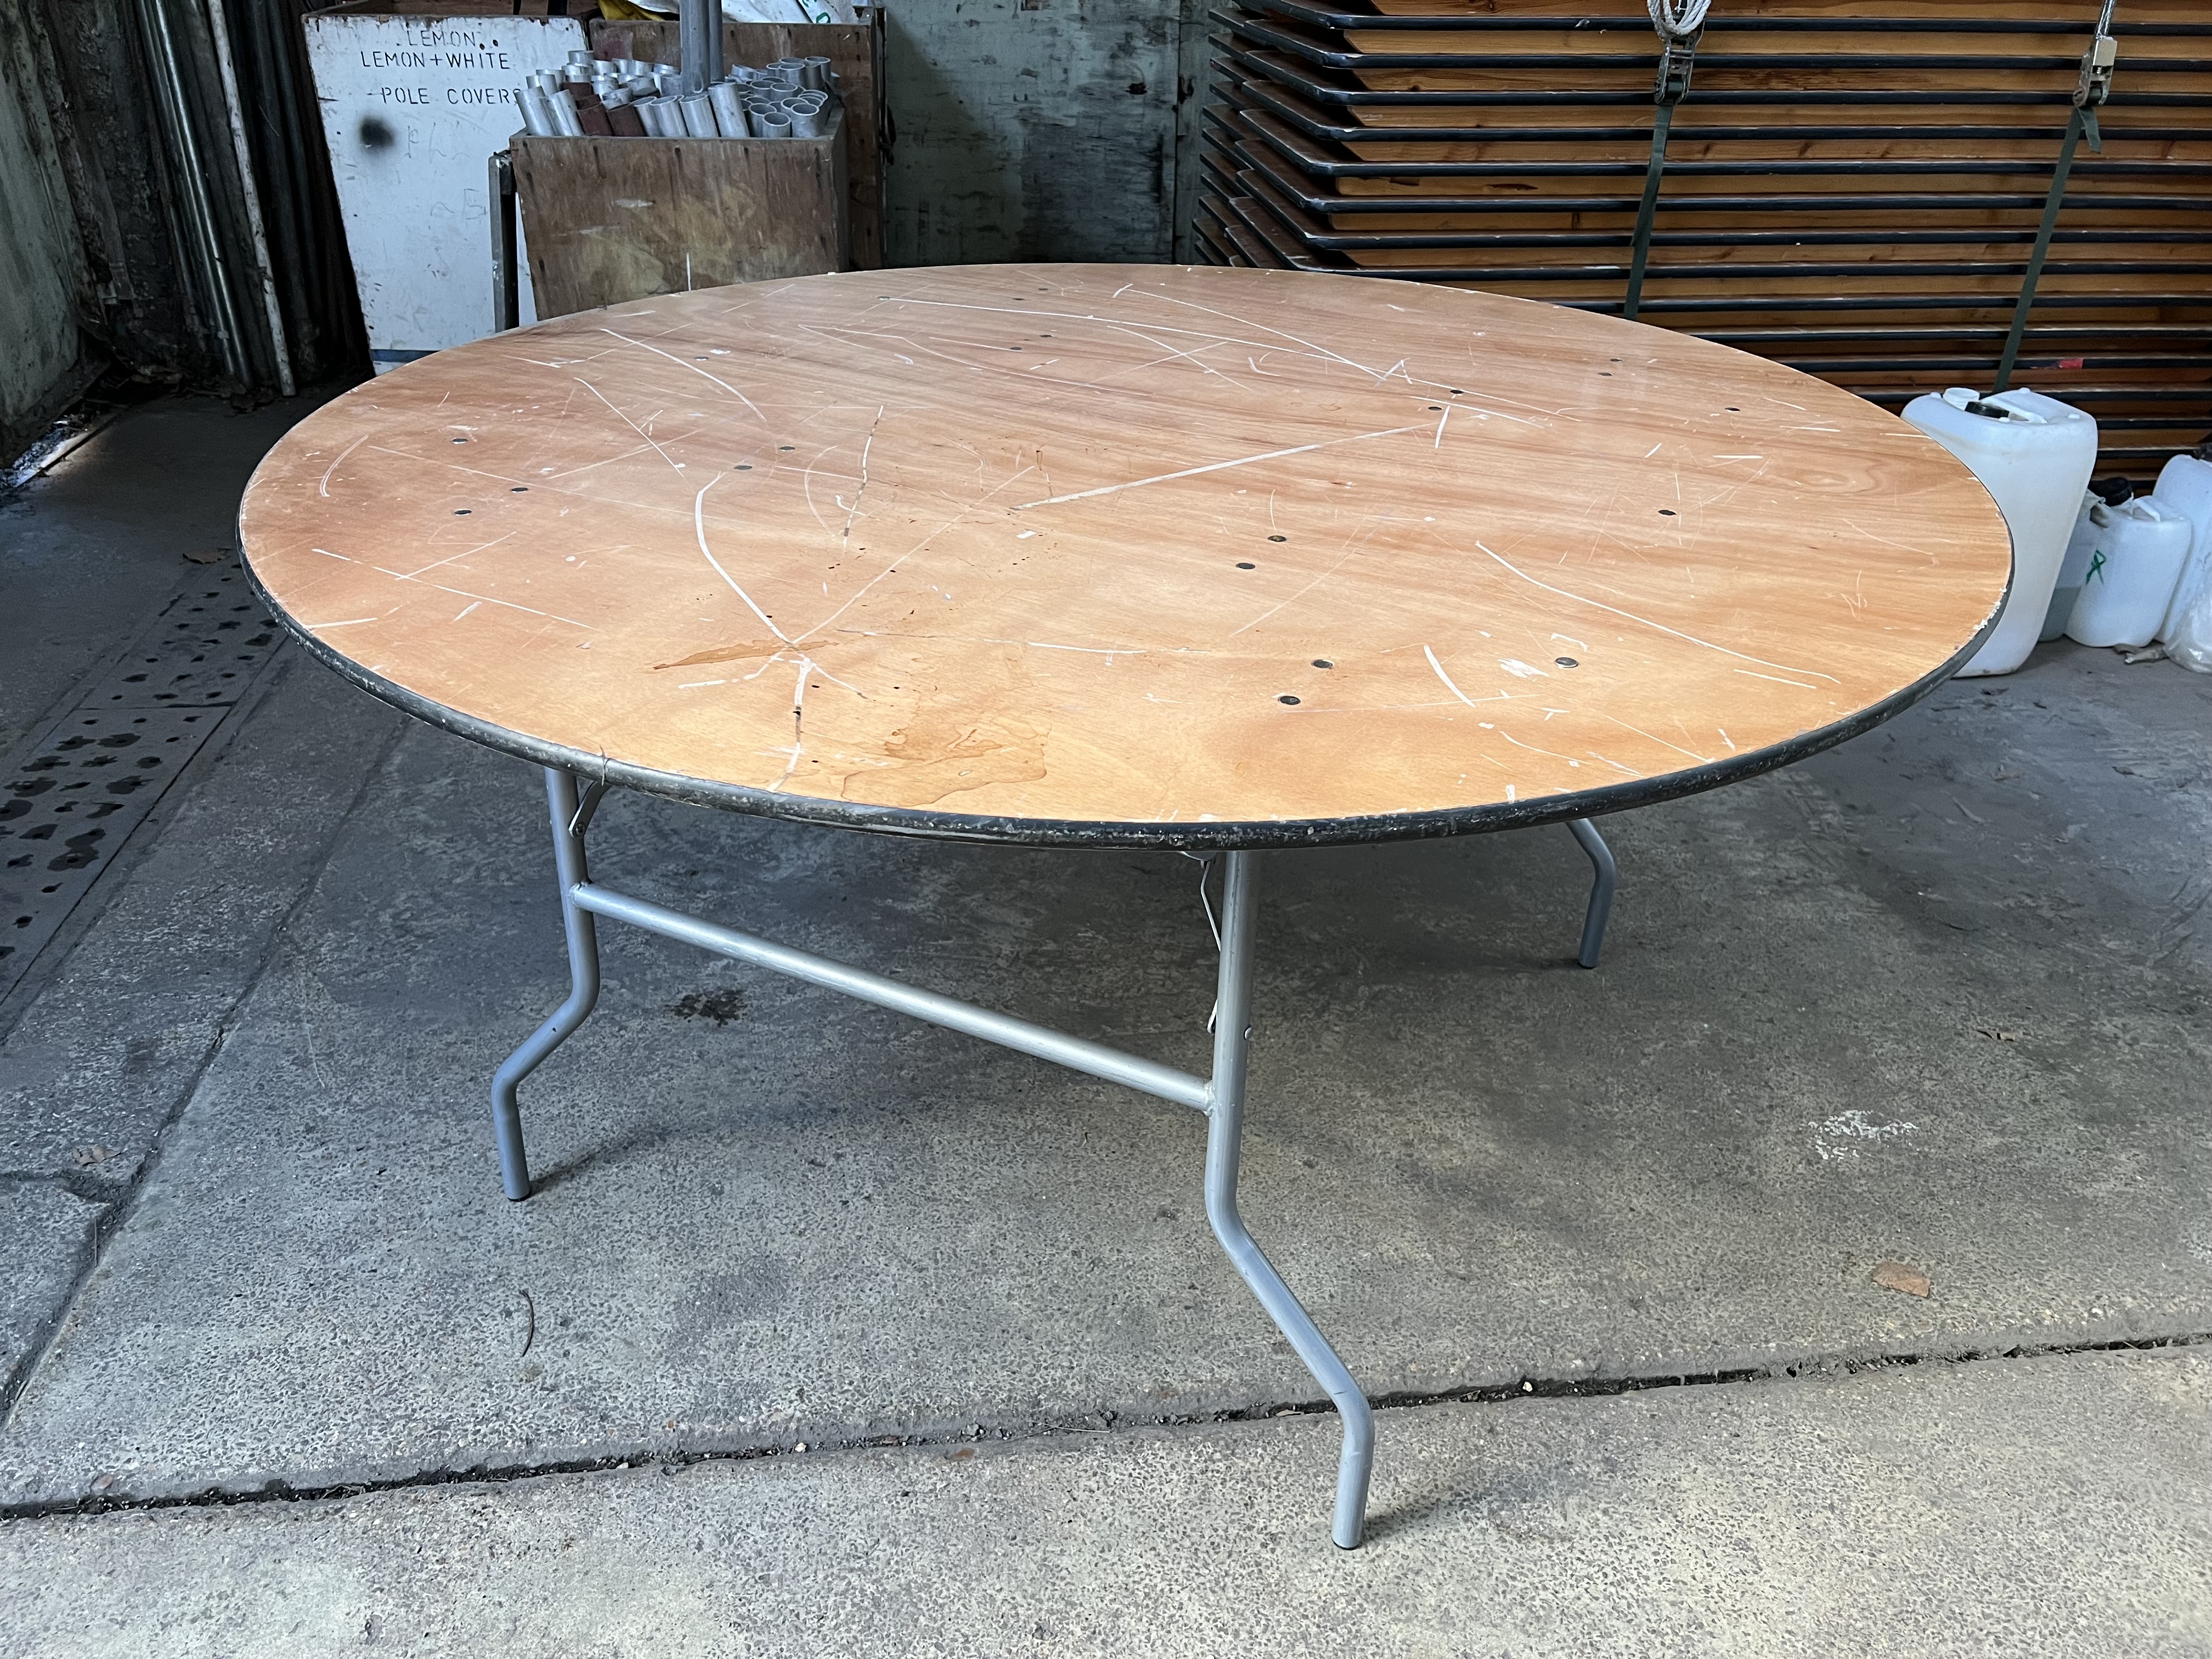 16 no 5ft diameter round tables with folding legs and plywood top. This lot is subject to VAT.